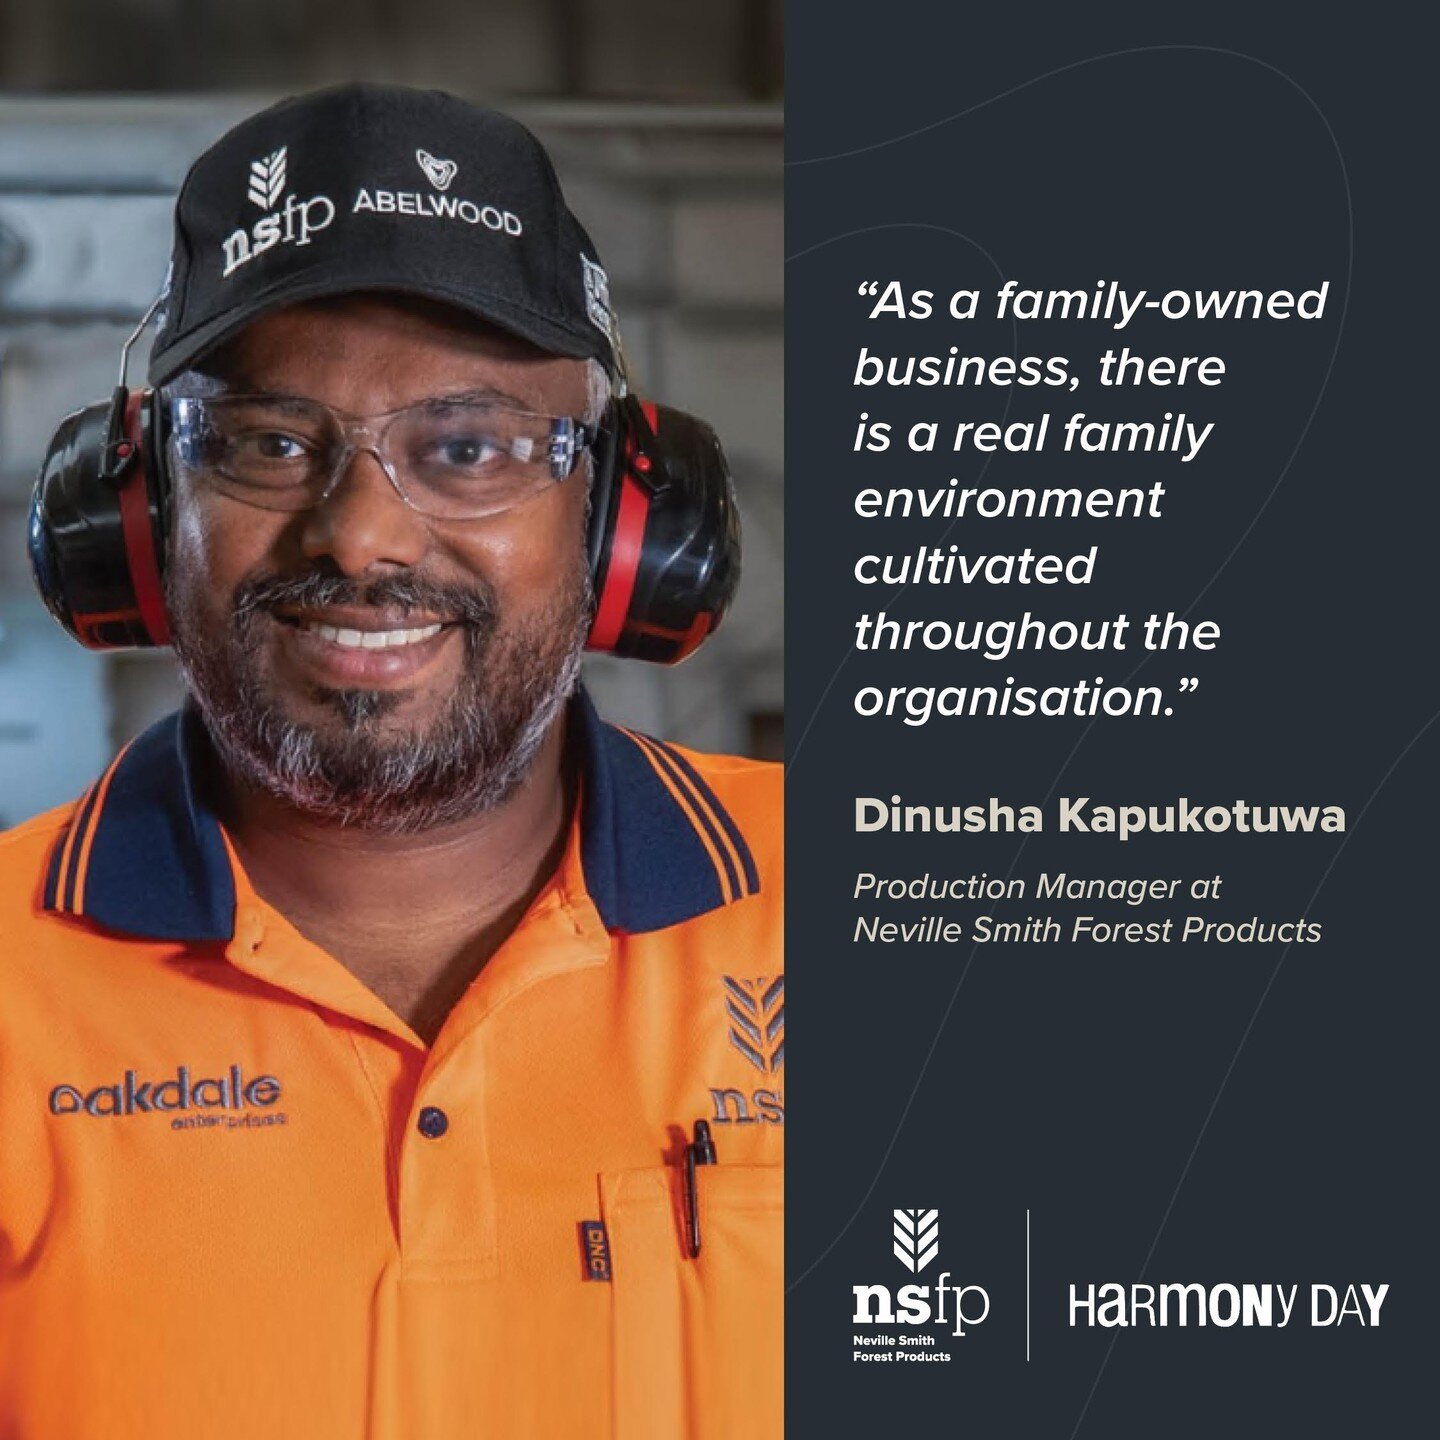 Happy #harmonyday from NSFP.

Harmony Week is the celebration that recognises our diversity and brings together Australians from all different backgrounds.

It&rsquo;s about inclusiveness, respect and a sense of belonging for everyone.

NSFP is an eq